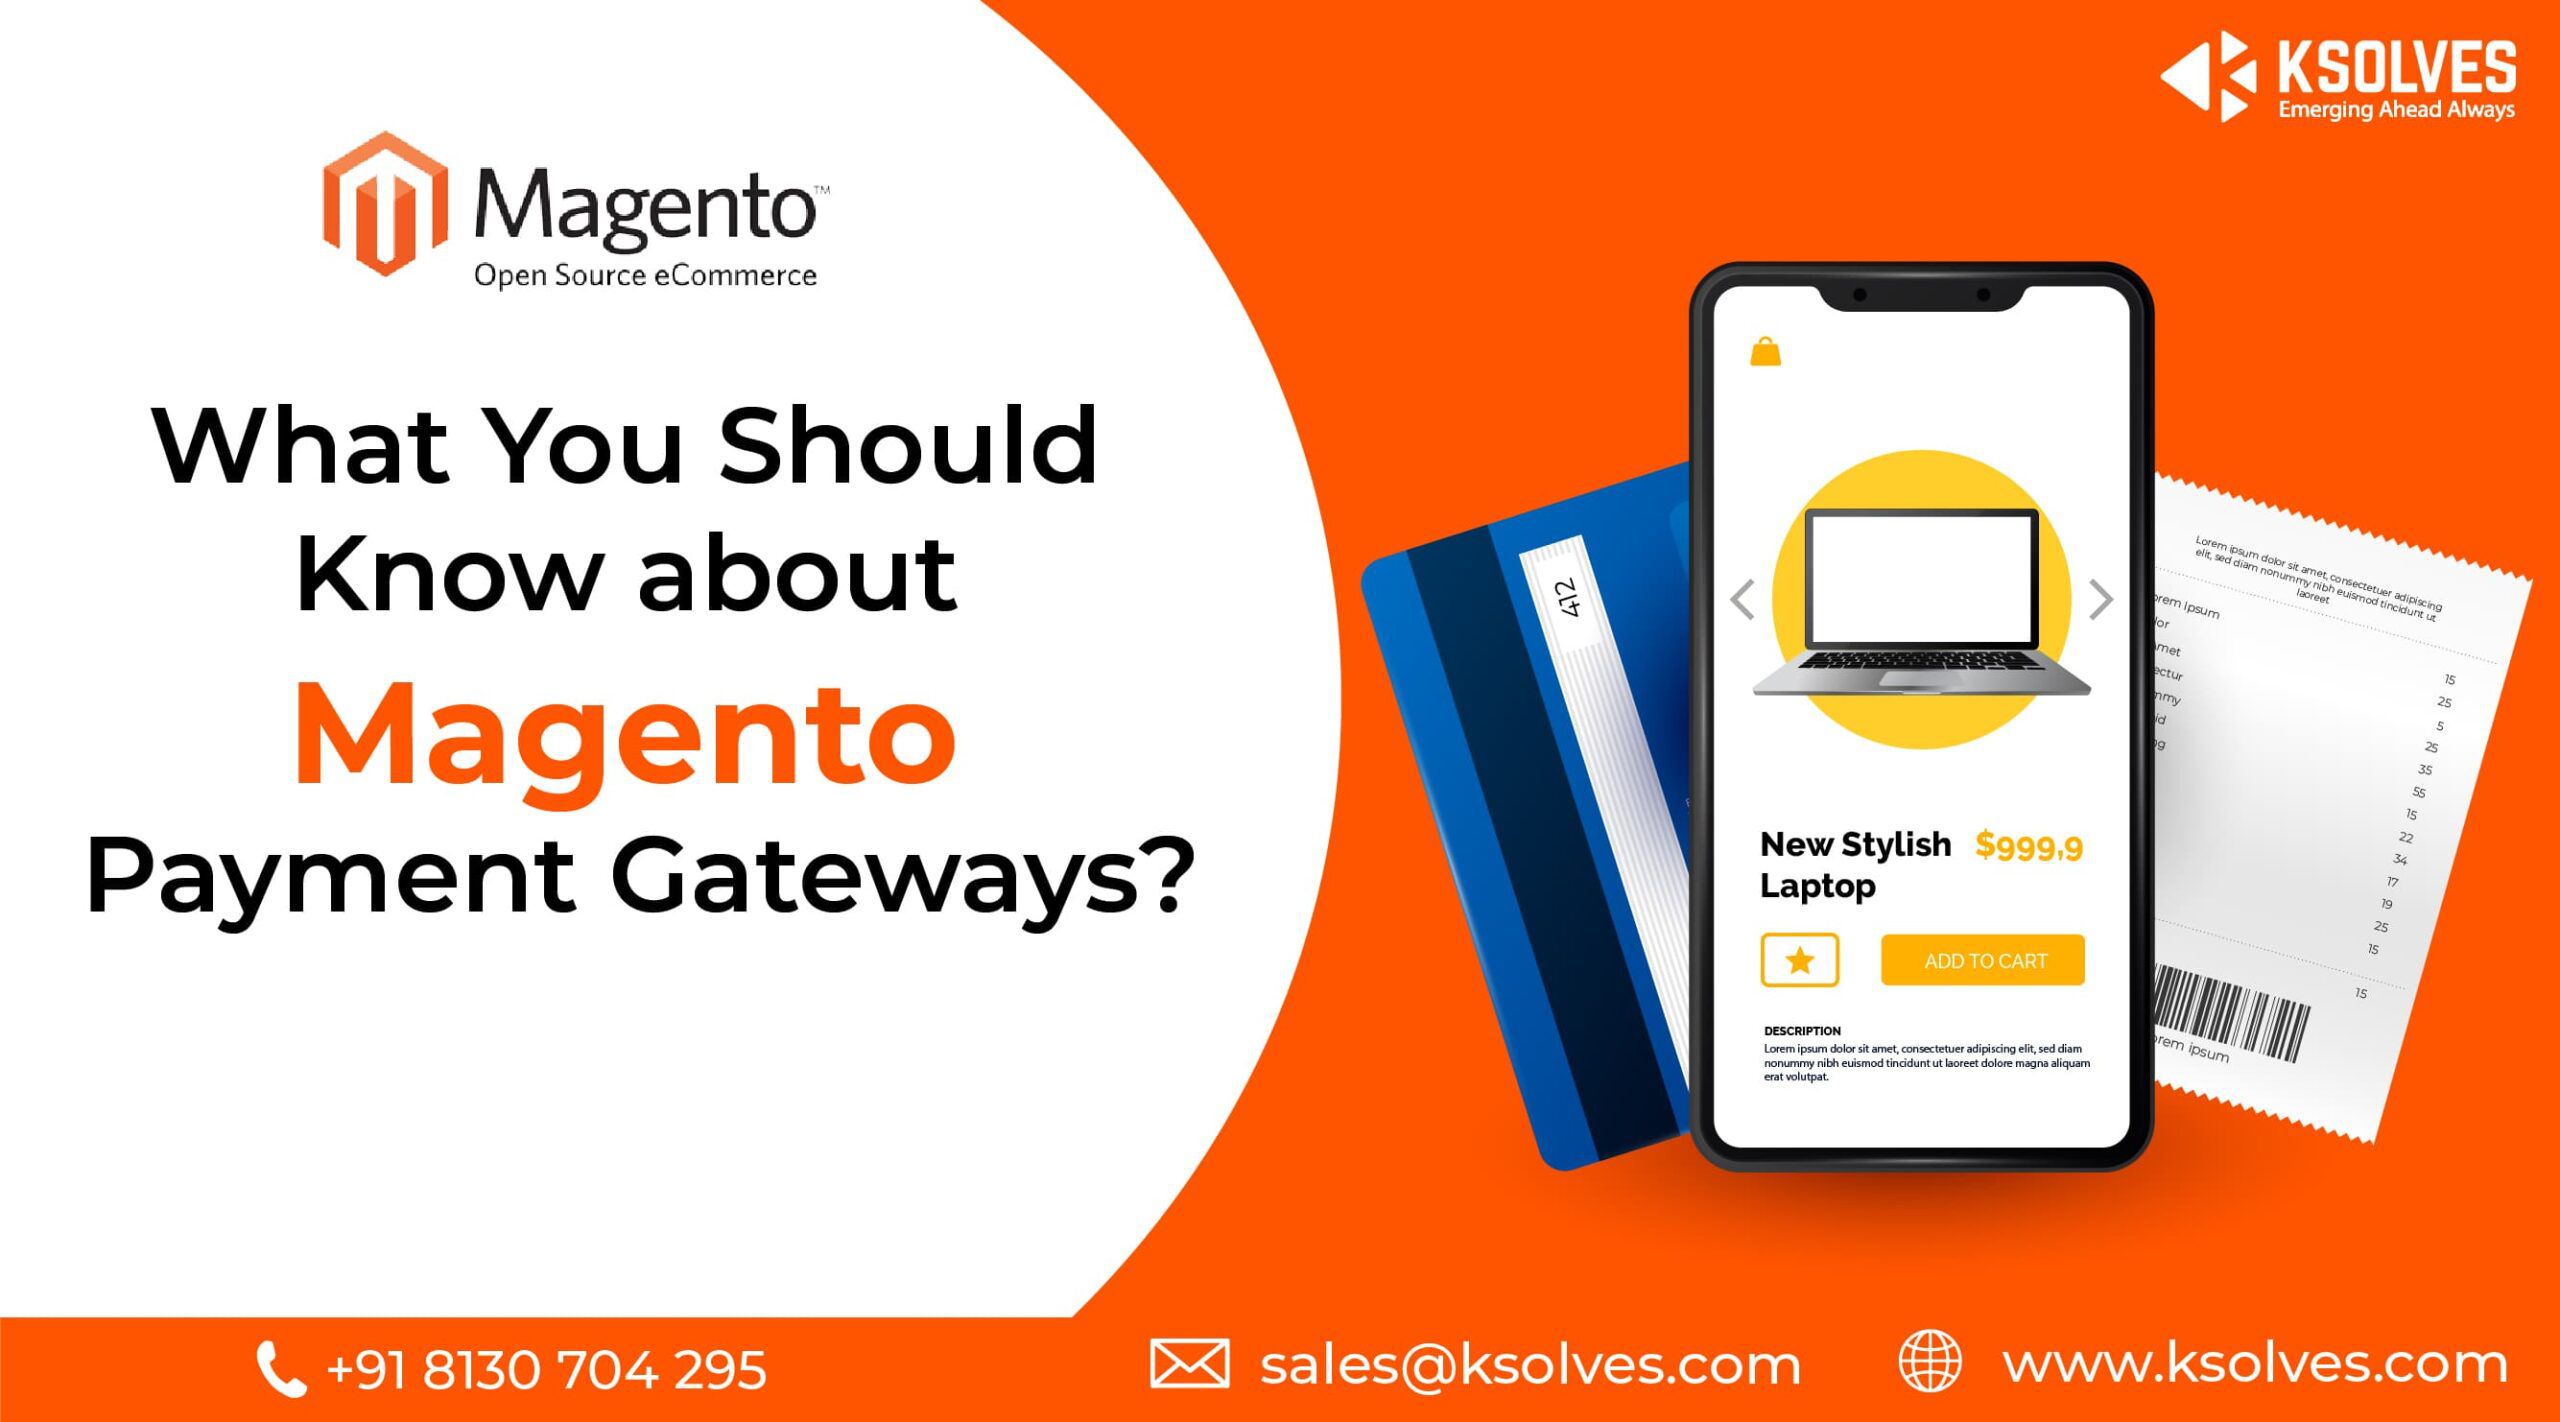 Know about Magento Payment Gateways